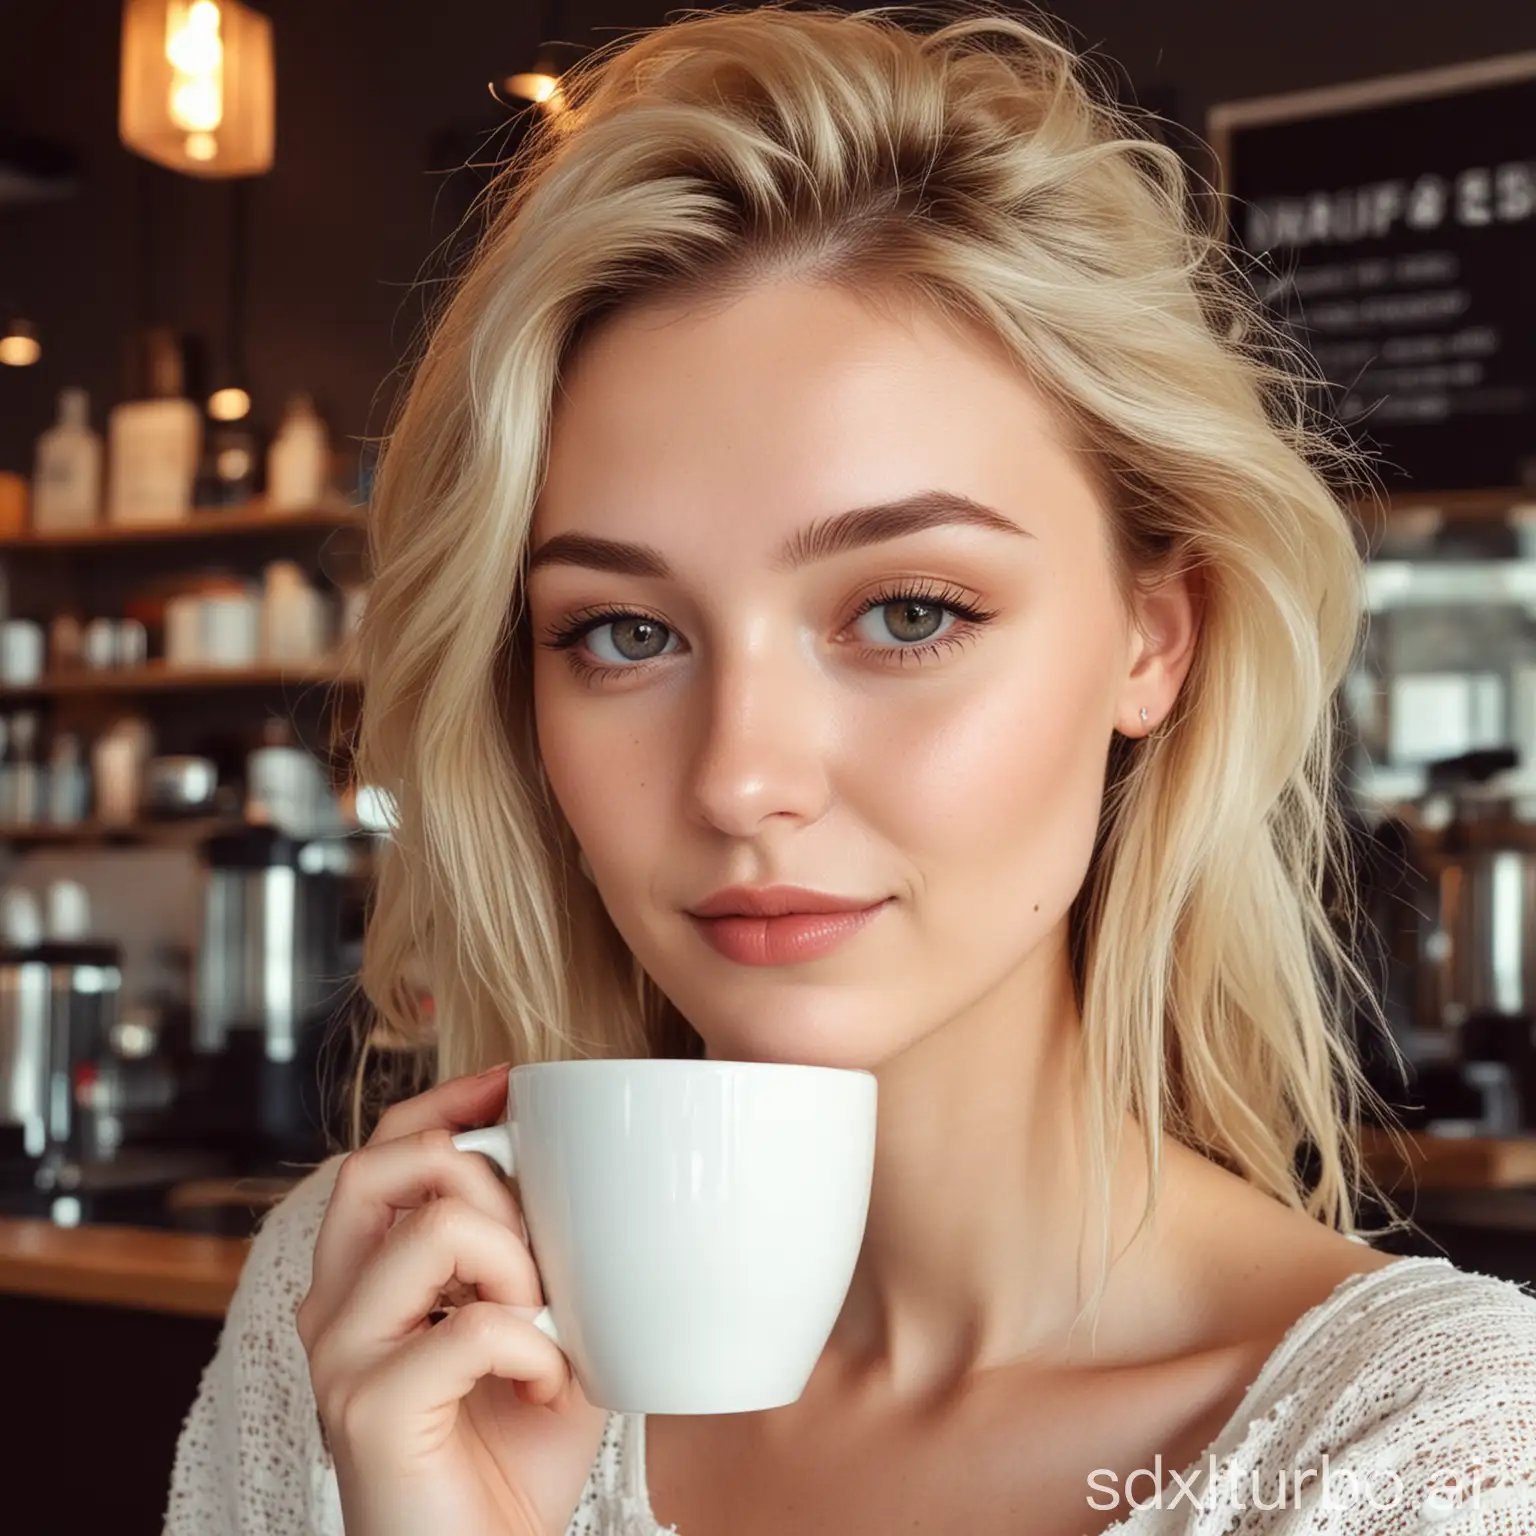 Profile-Picture-of-a-FairSkinned-Lady-in-a-Coffee-Shop